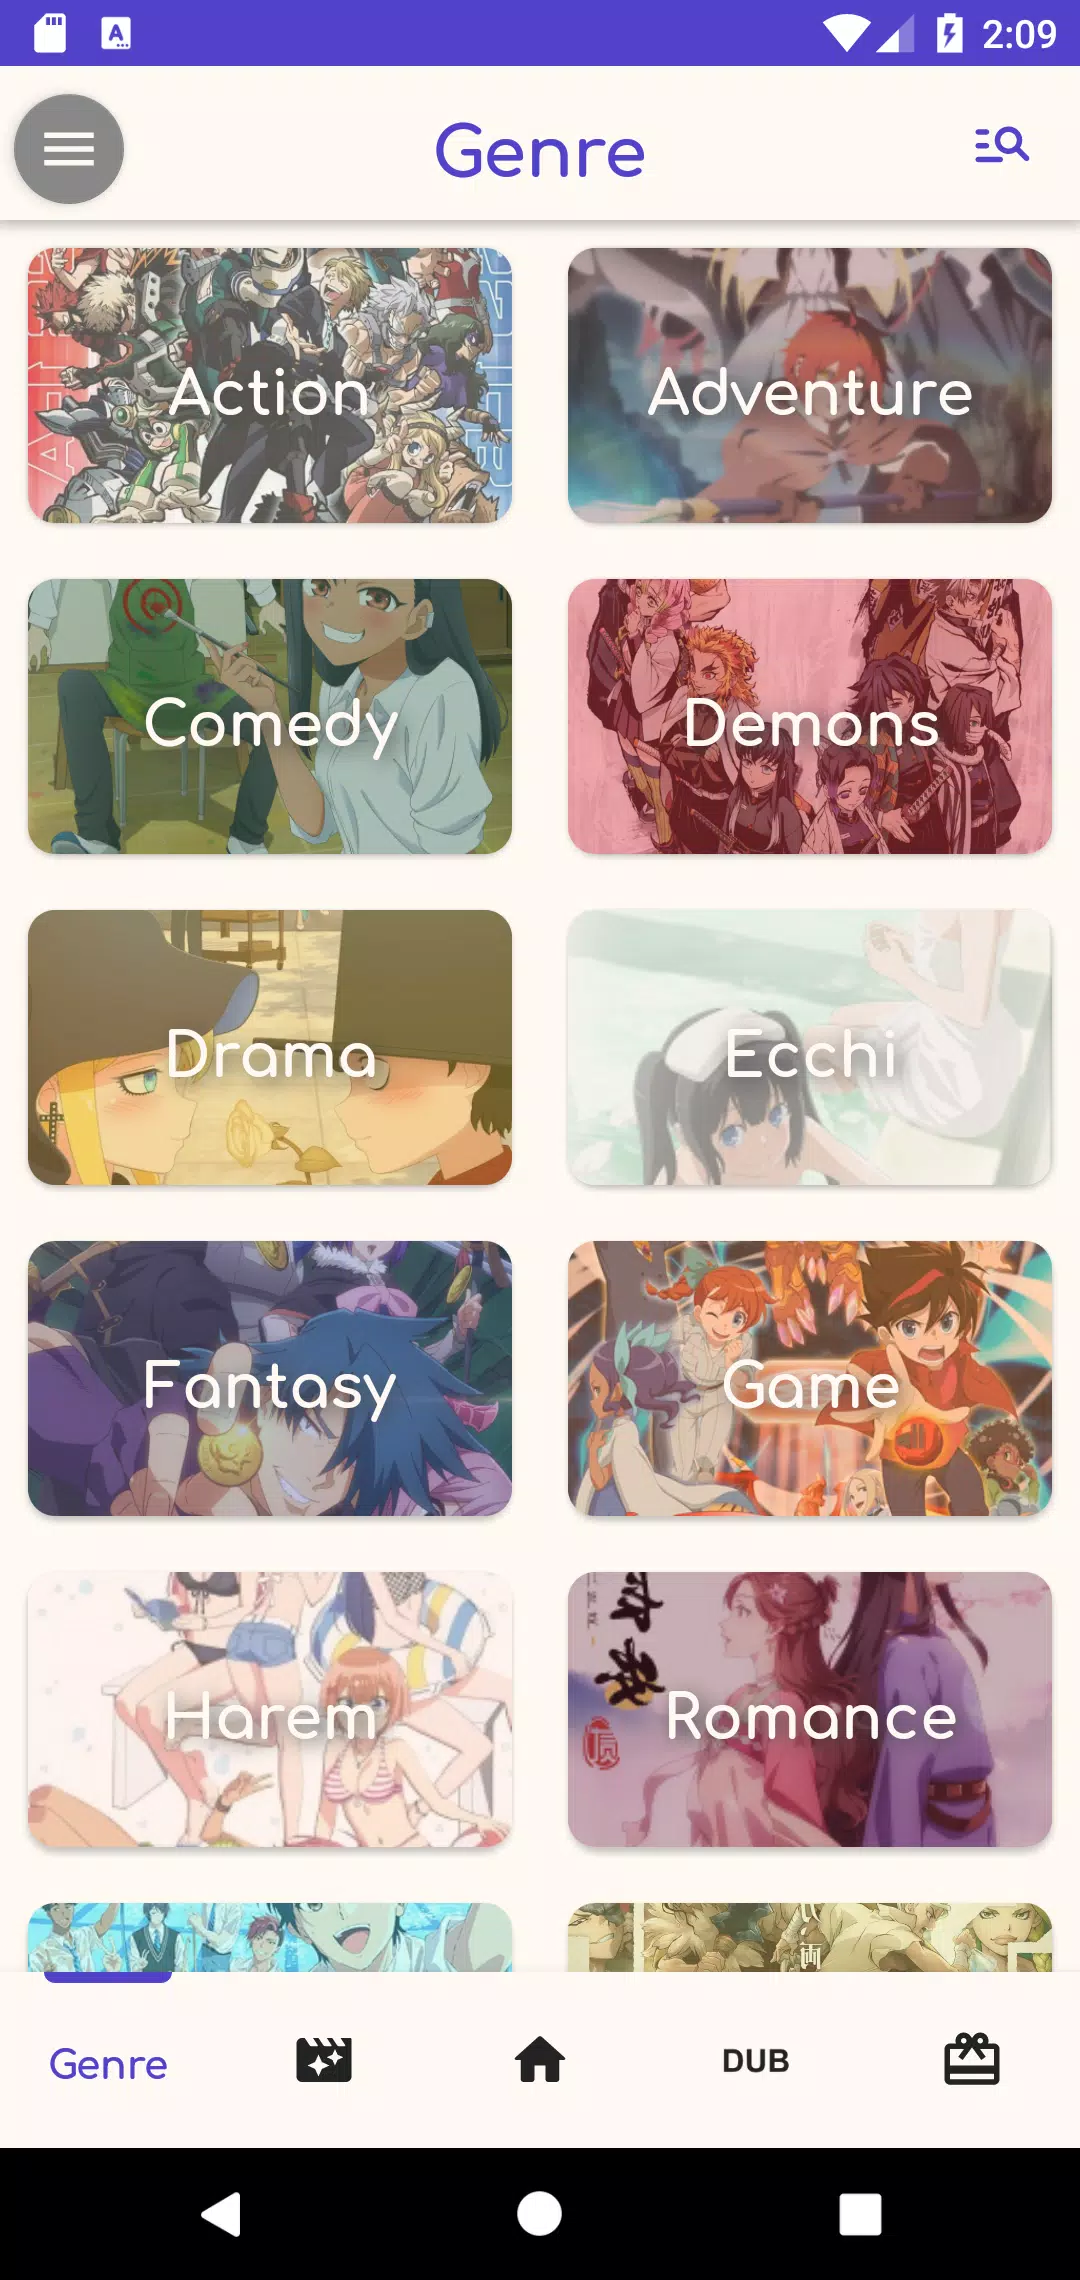 BetterAnime - Browser Animes Online APK (Android App) - Free Download